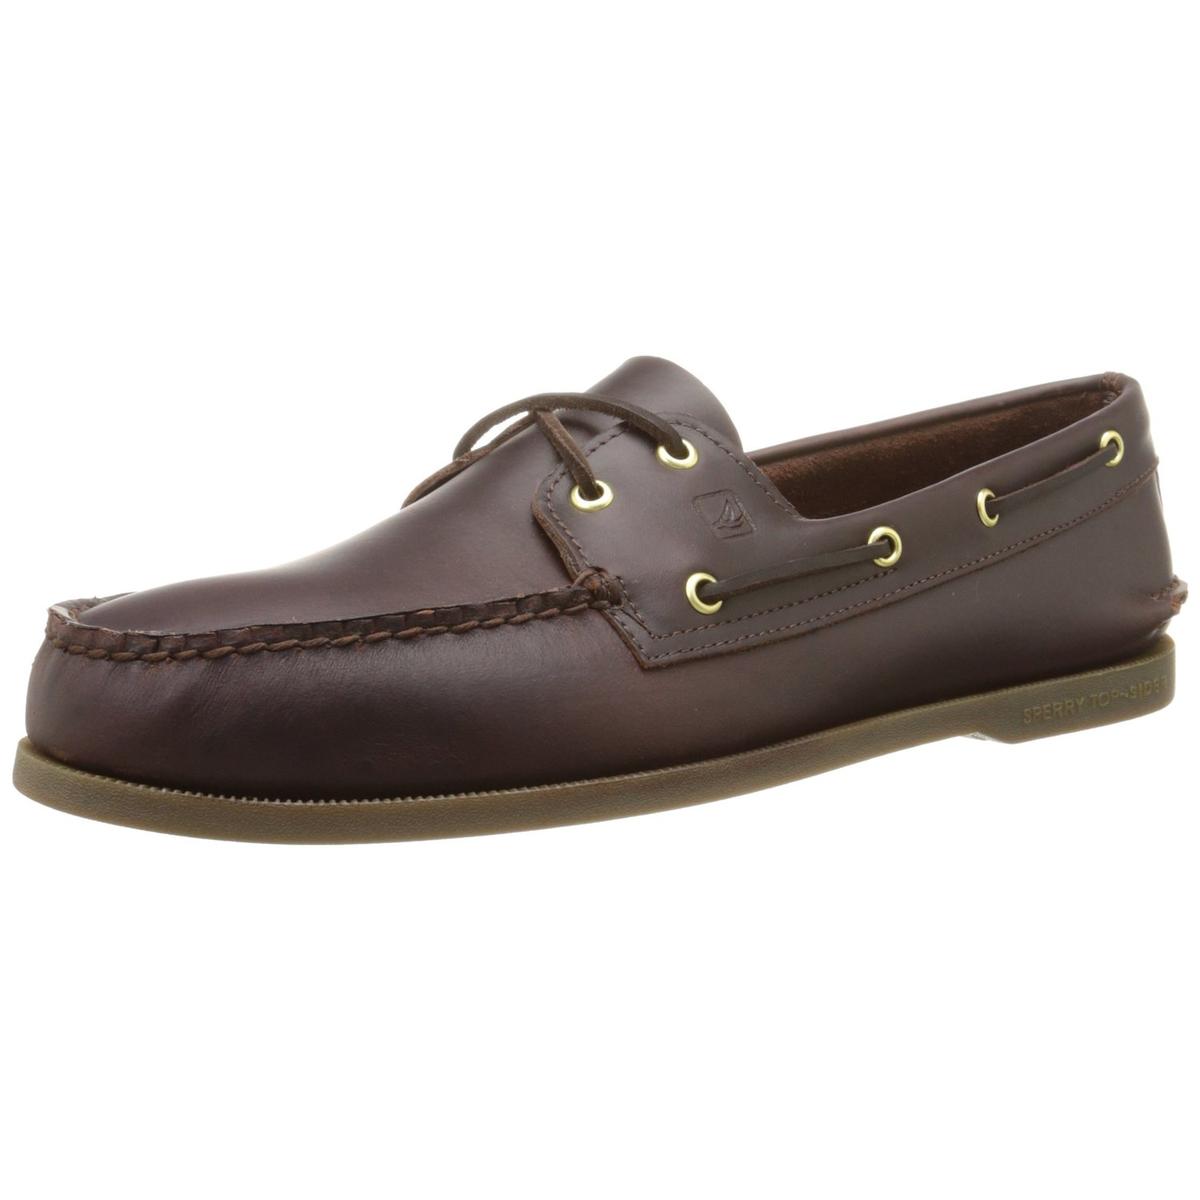 Sperry Top-Sider A/O Men's Amaretto Boat Shoes | eBay